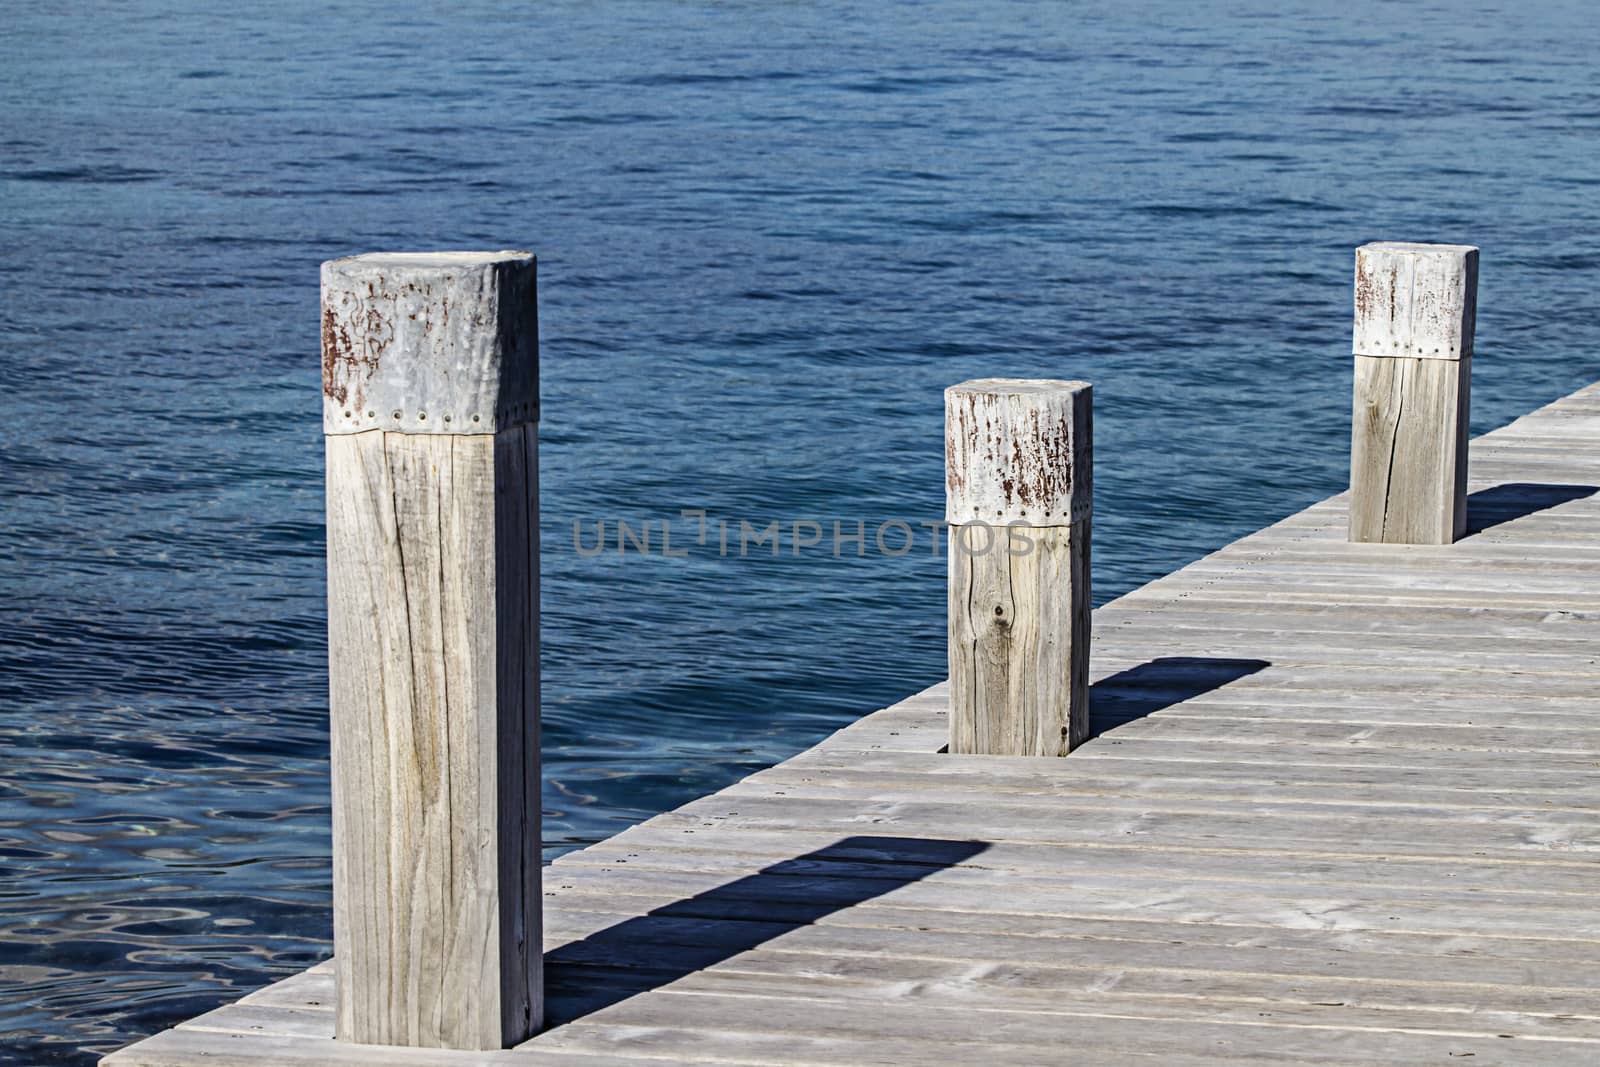 A small quay and its three square mooring poles that create geometric games with the shadows and the symmetry of the wooden planks of the quay on the blue sea